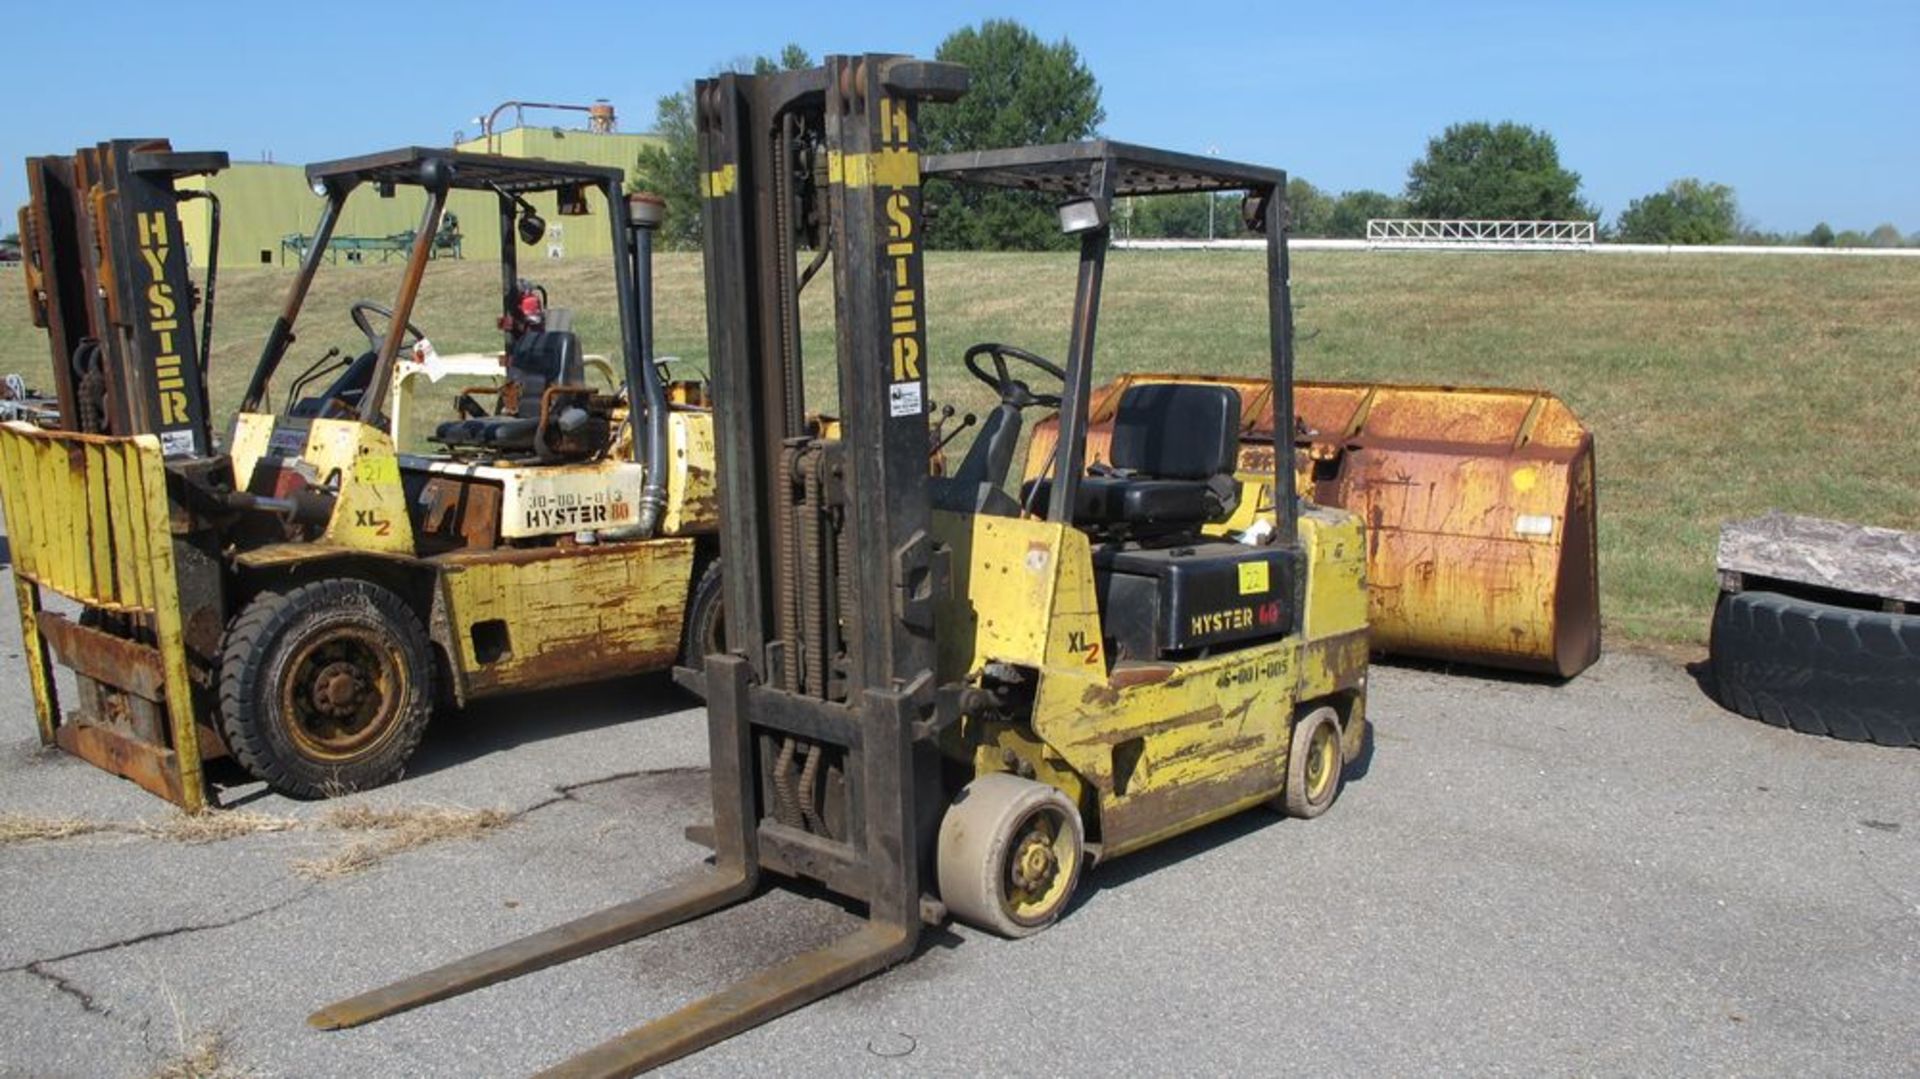 HYSTER S60XL PROPANE FORK TRUCK (NEEDS REPAIR), 4250 LB CAP, 3 STAGE, 191" LIFT, SOLID TIRES, 46"